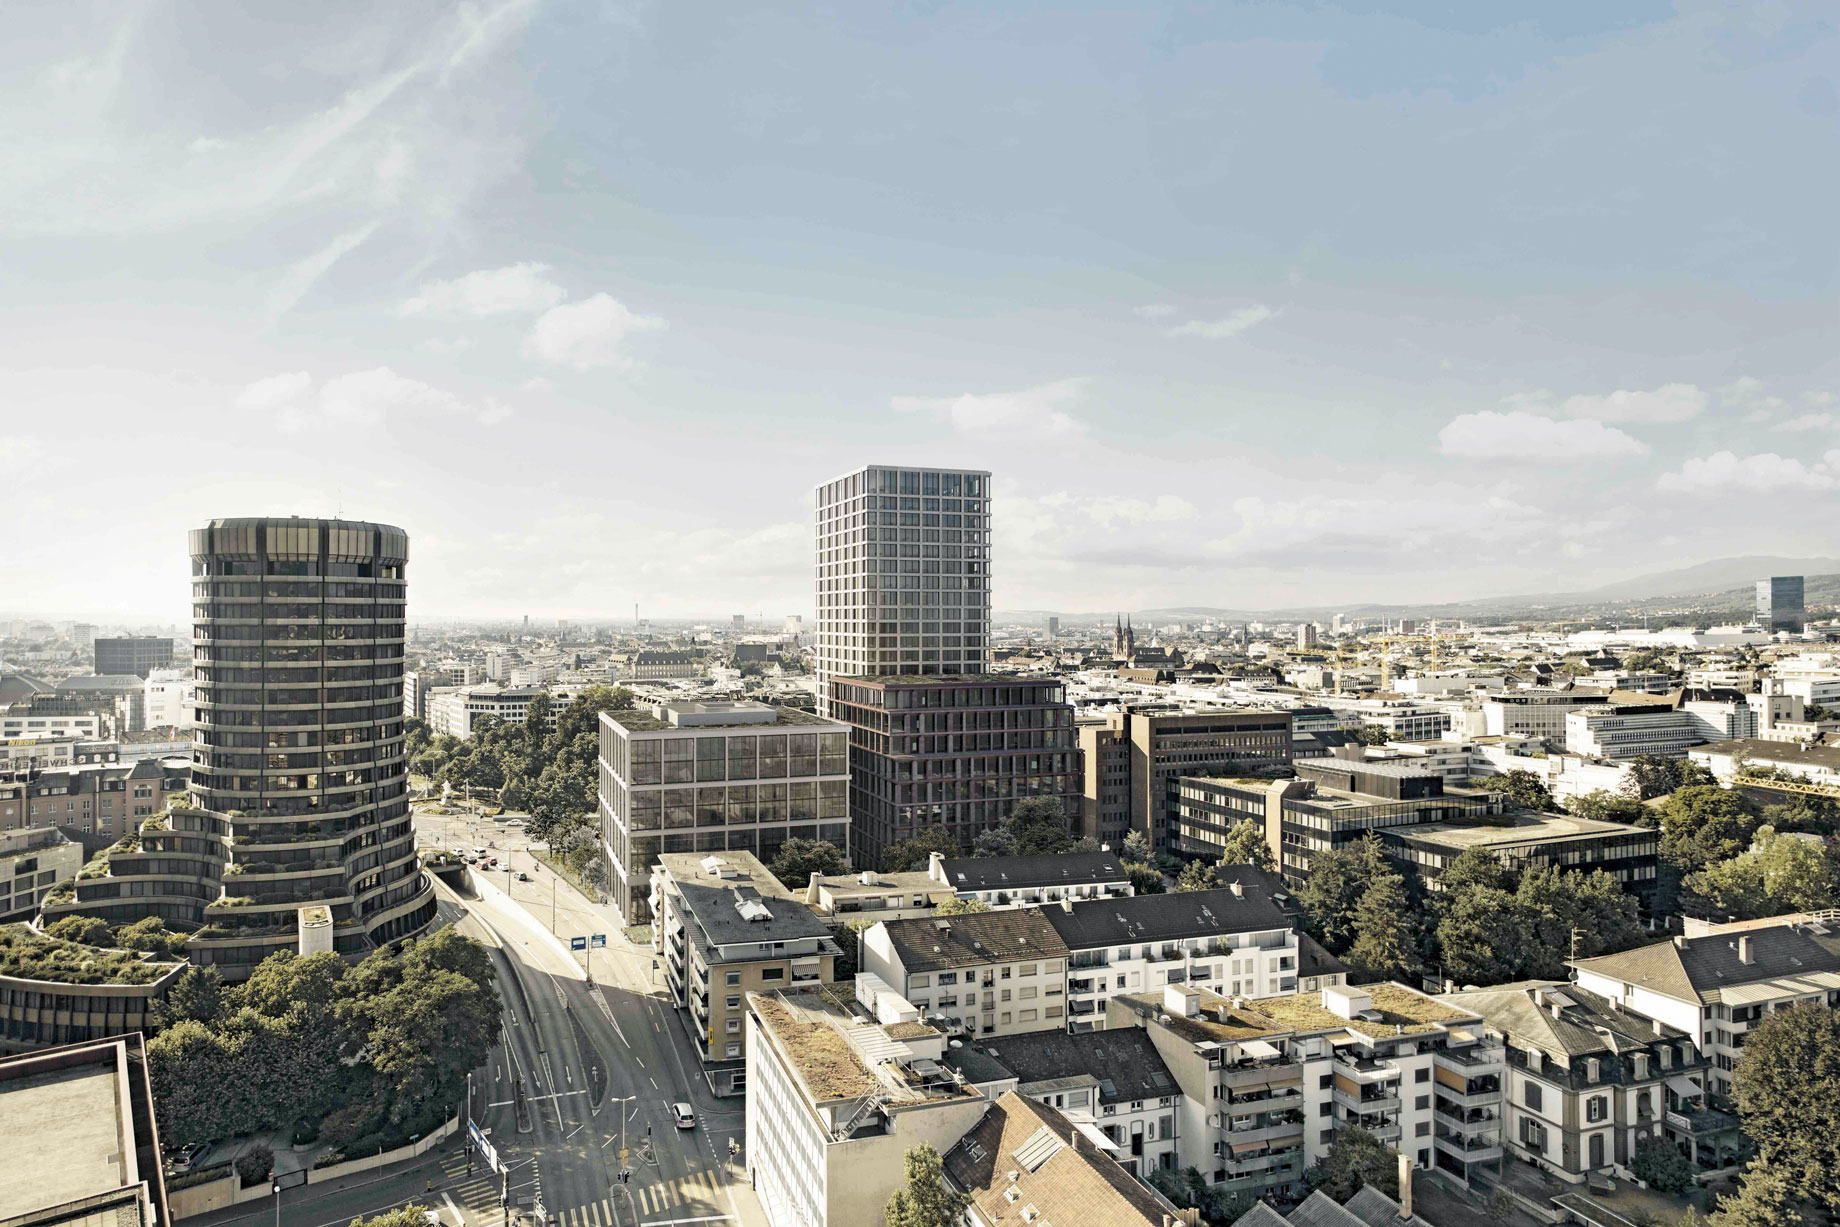 Visualisation: three state-of-the-art new buildings next to a green, park-like area; in the background, the rooftops of the city of Basel